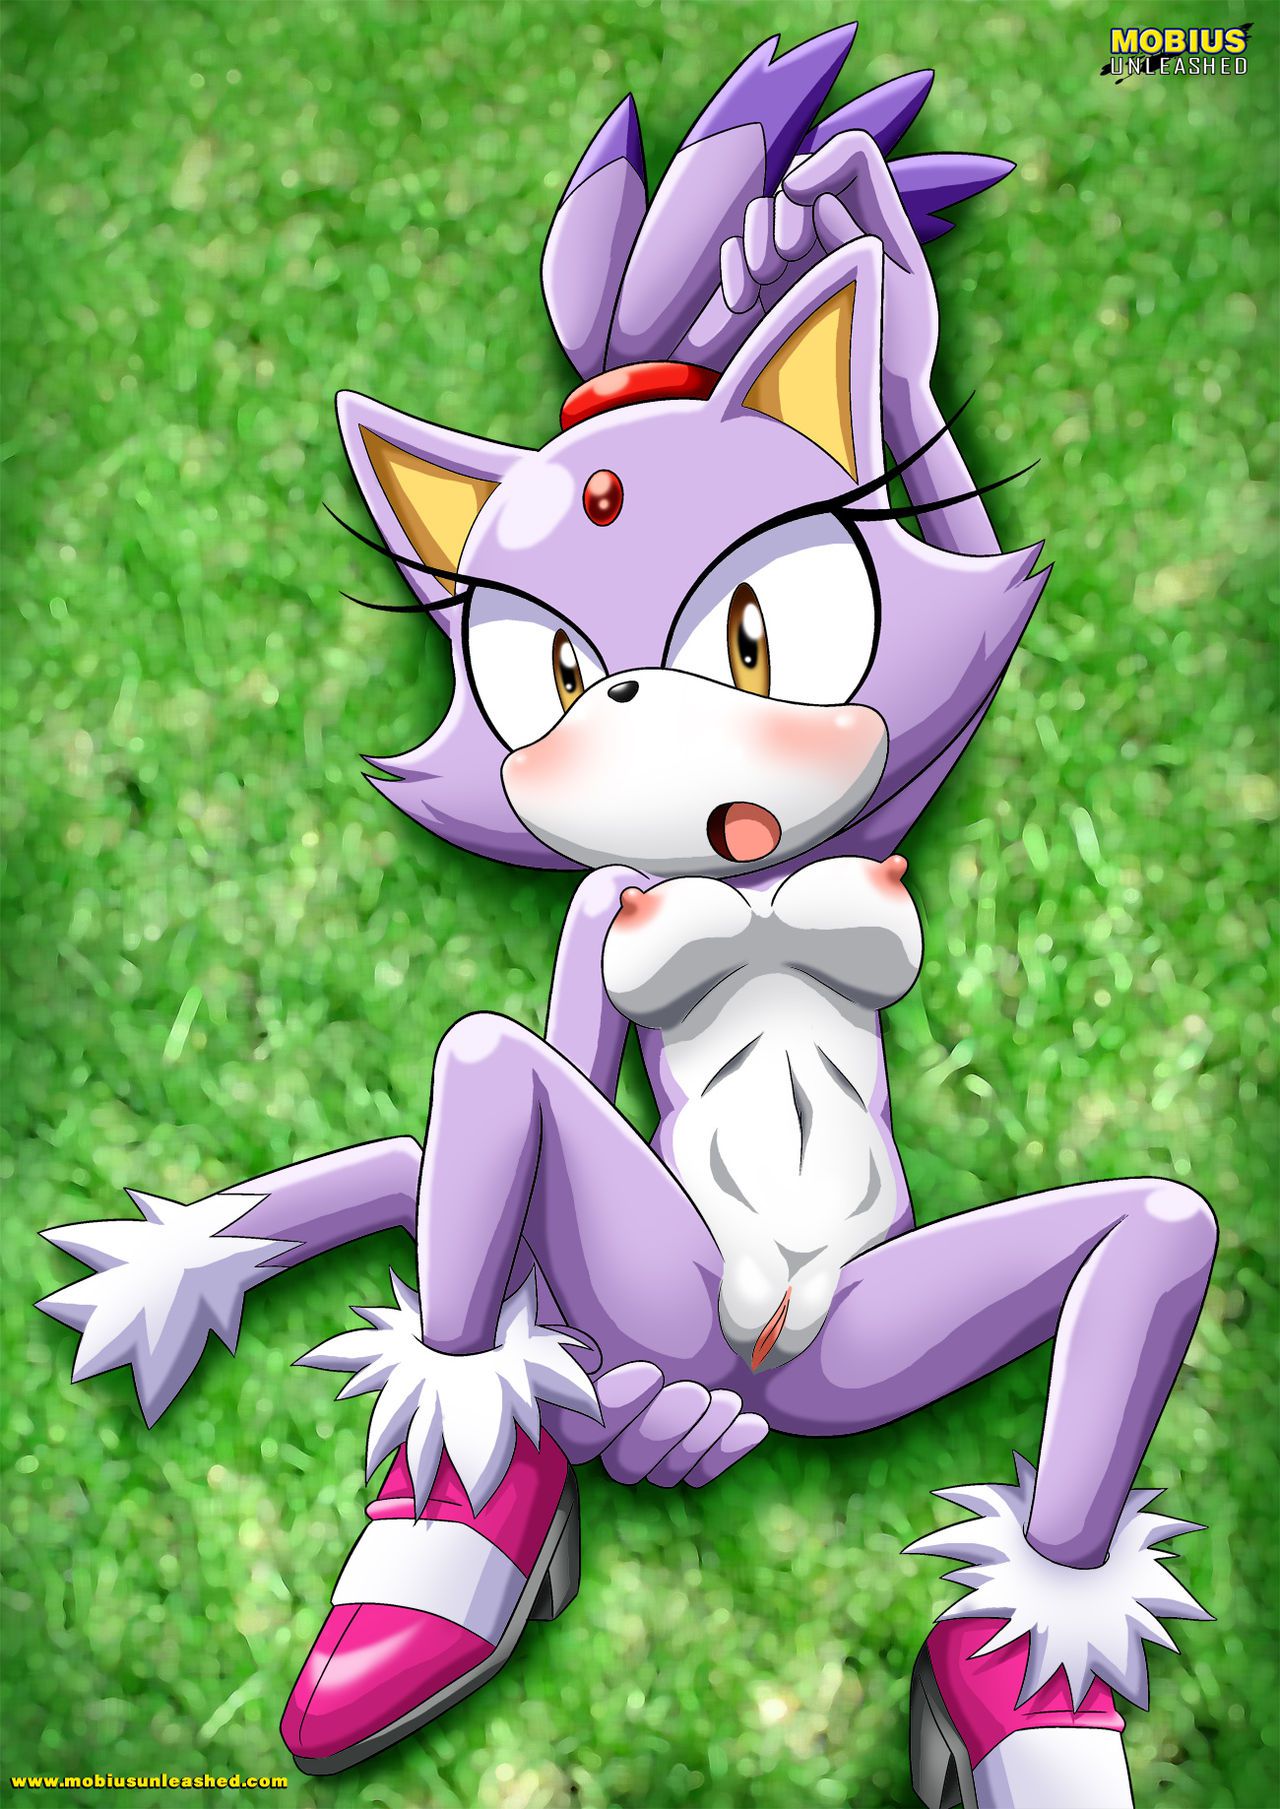 Mobius Unleashed: Blaze the Cat 1